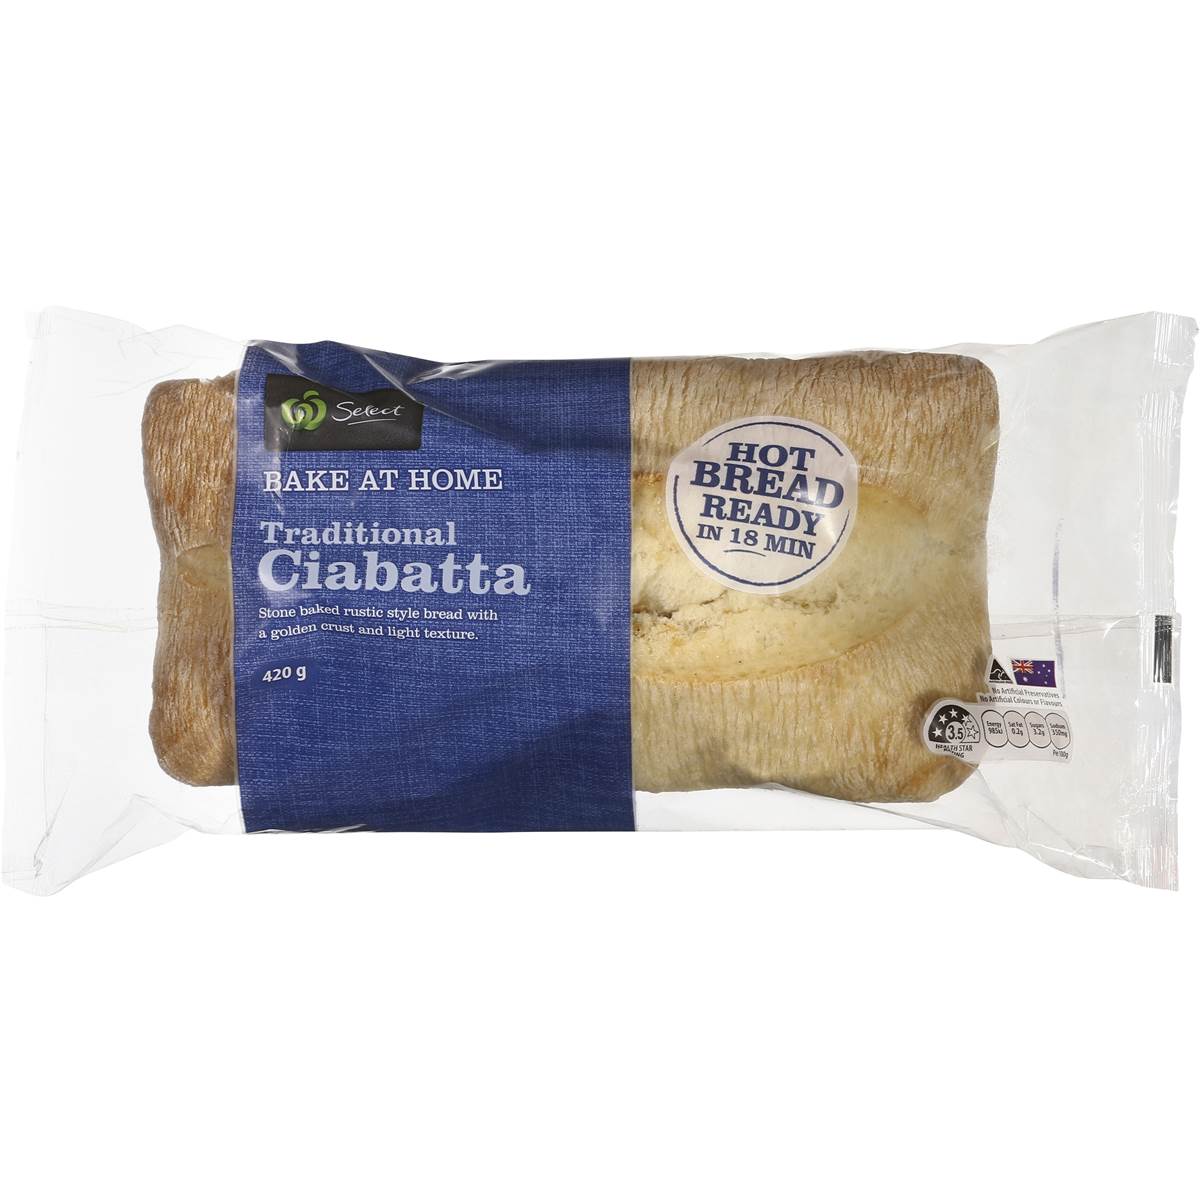 Woolworths Bake At Home Stone Baked Ciabatta Traditional Plain